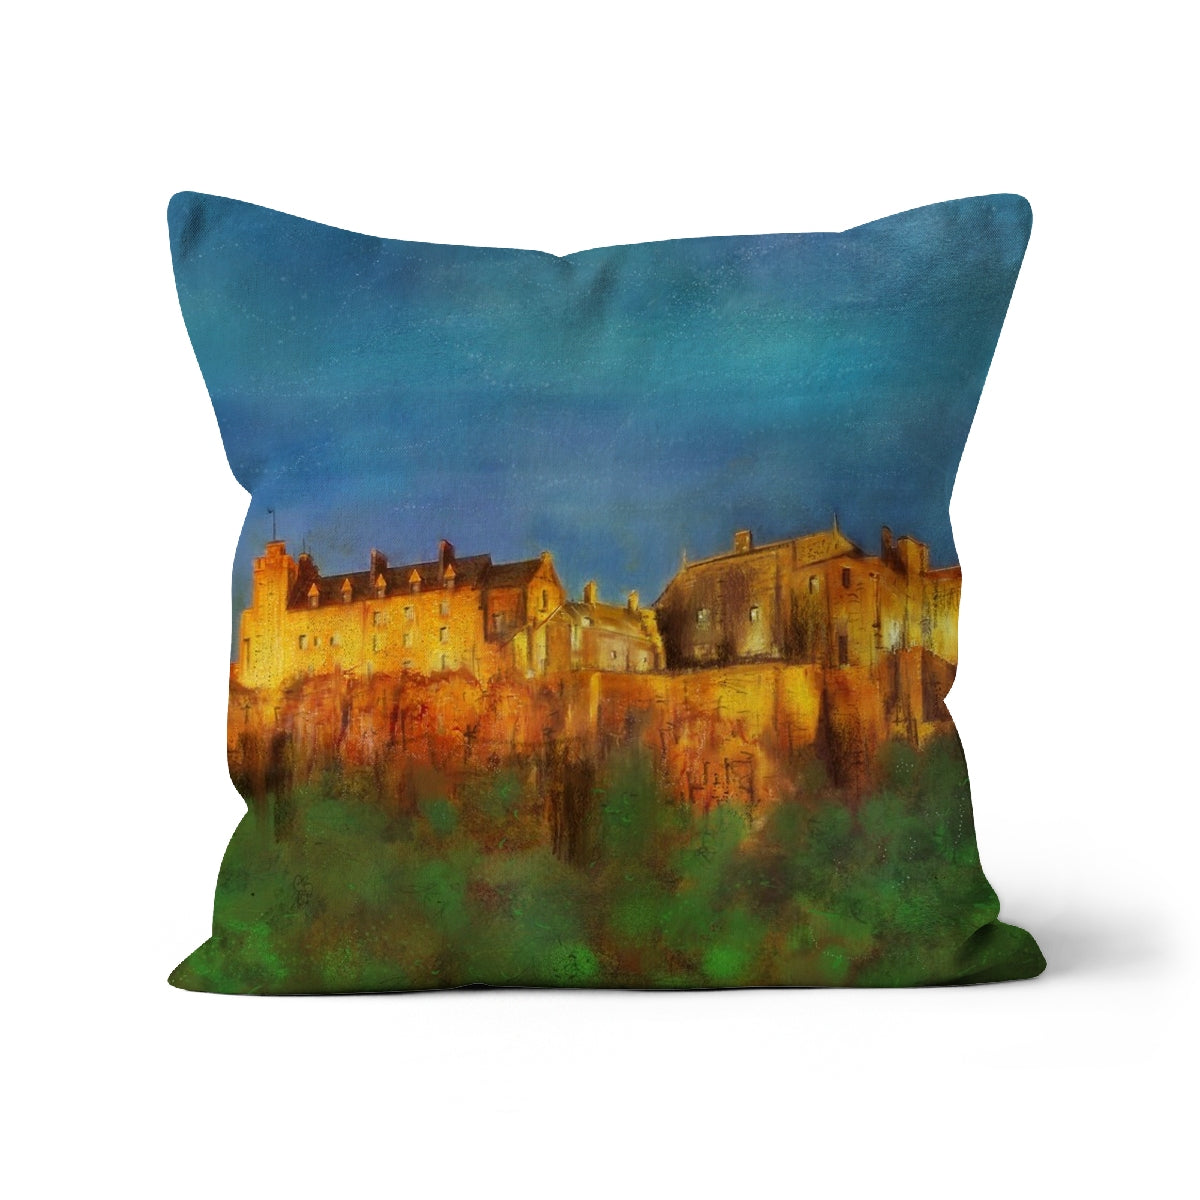 Stirling Castle Art Gifts Cushion-Cushions-Historic & Iconic Scotland Art Gallery-Canvas-18"x18"-Paintings, Prints, Homeware, Art Gifts From Scotland By Scottish Artist Kevin Hunter